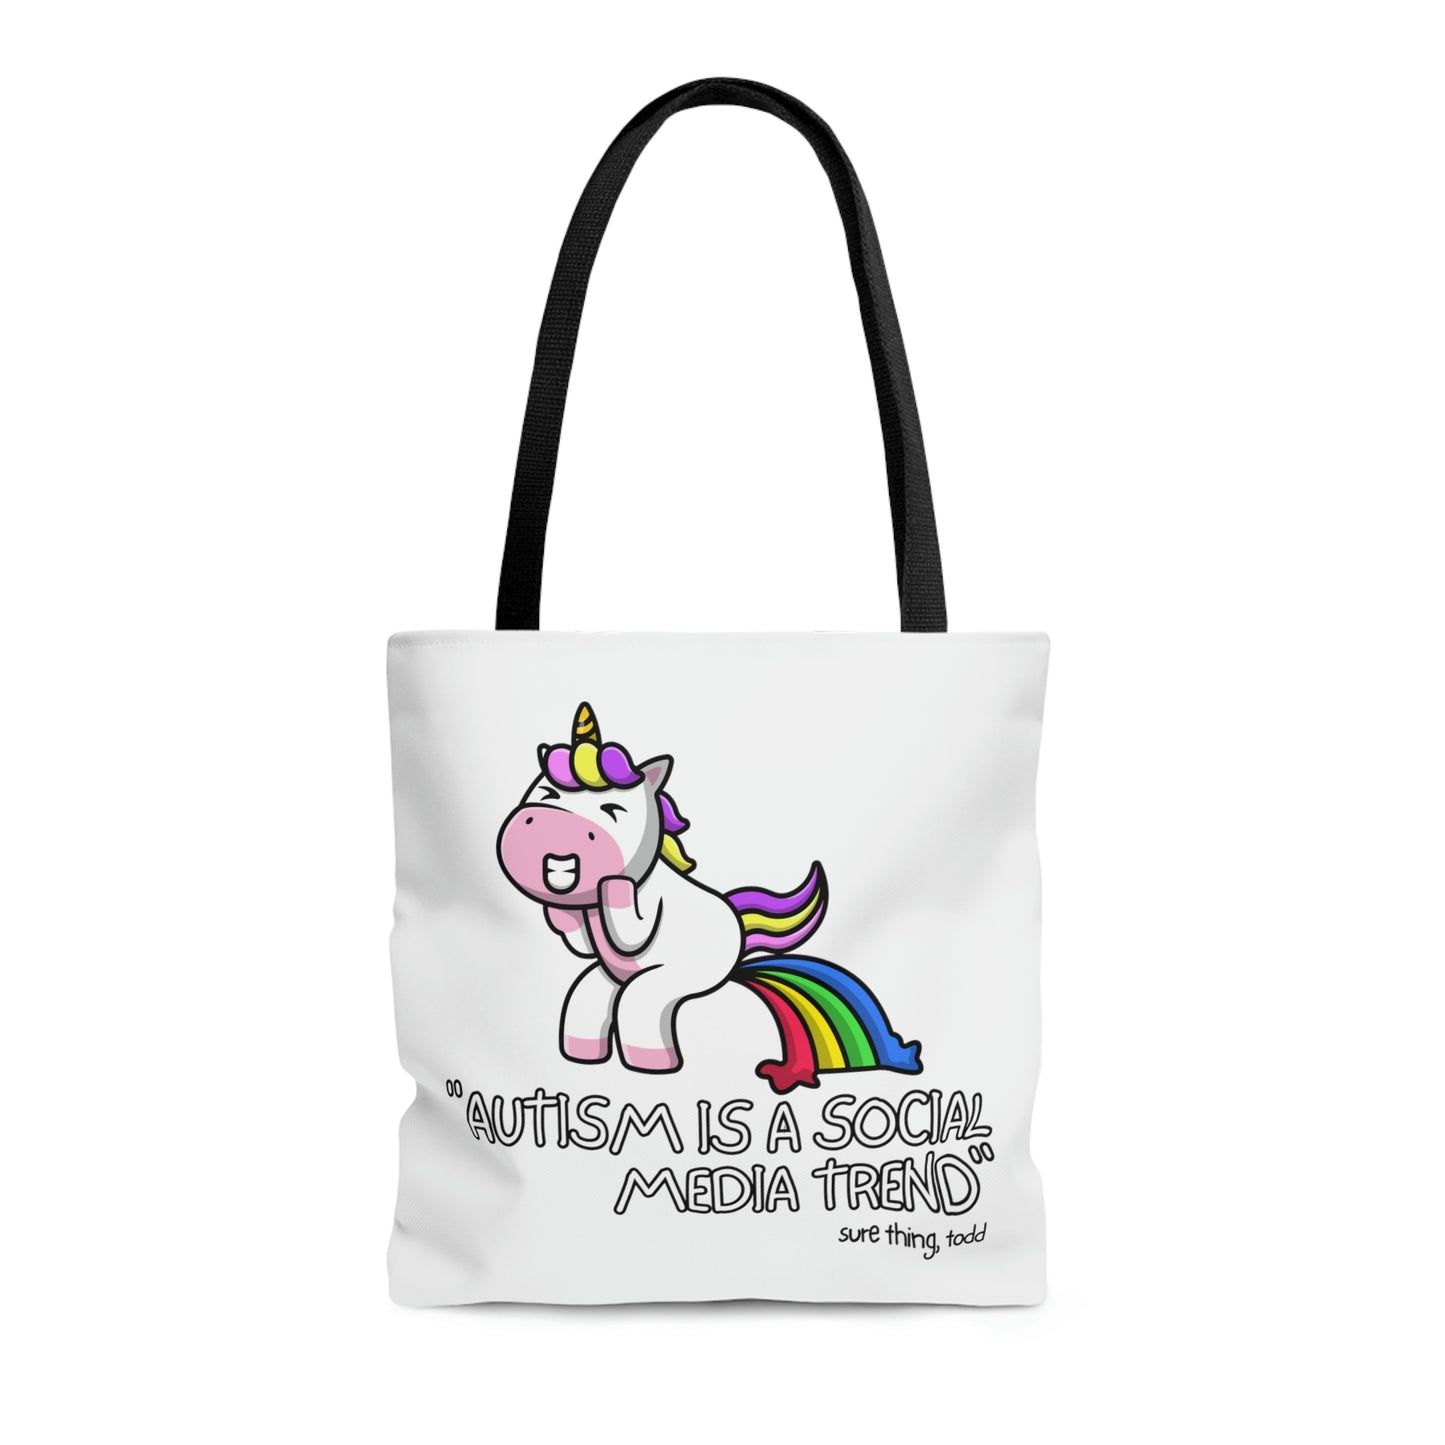 "Autism is a Social Media Trend" Tote Bag in 3 sizes